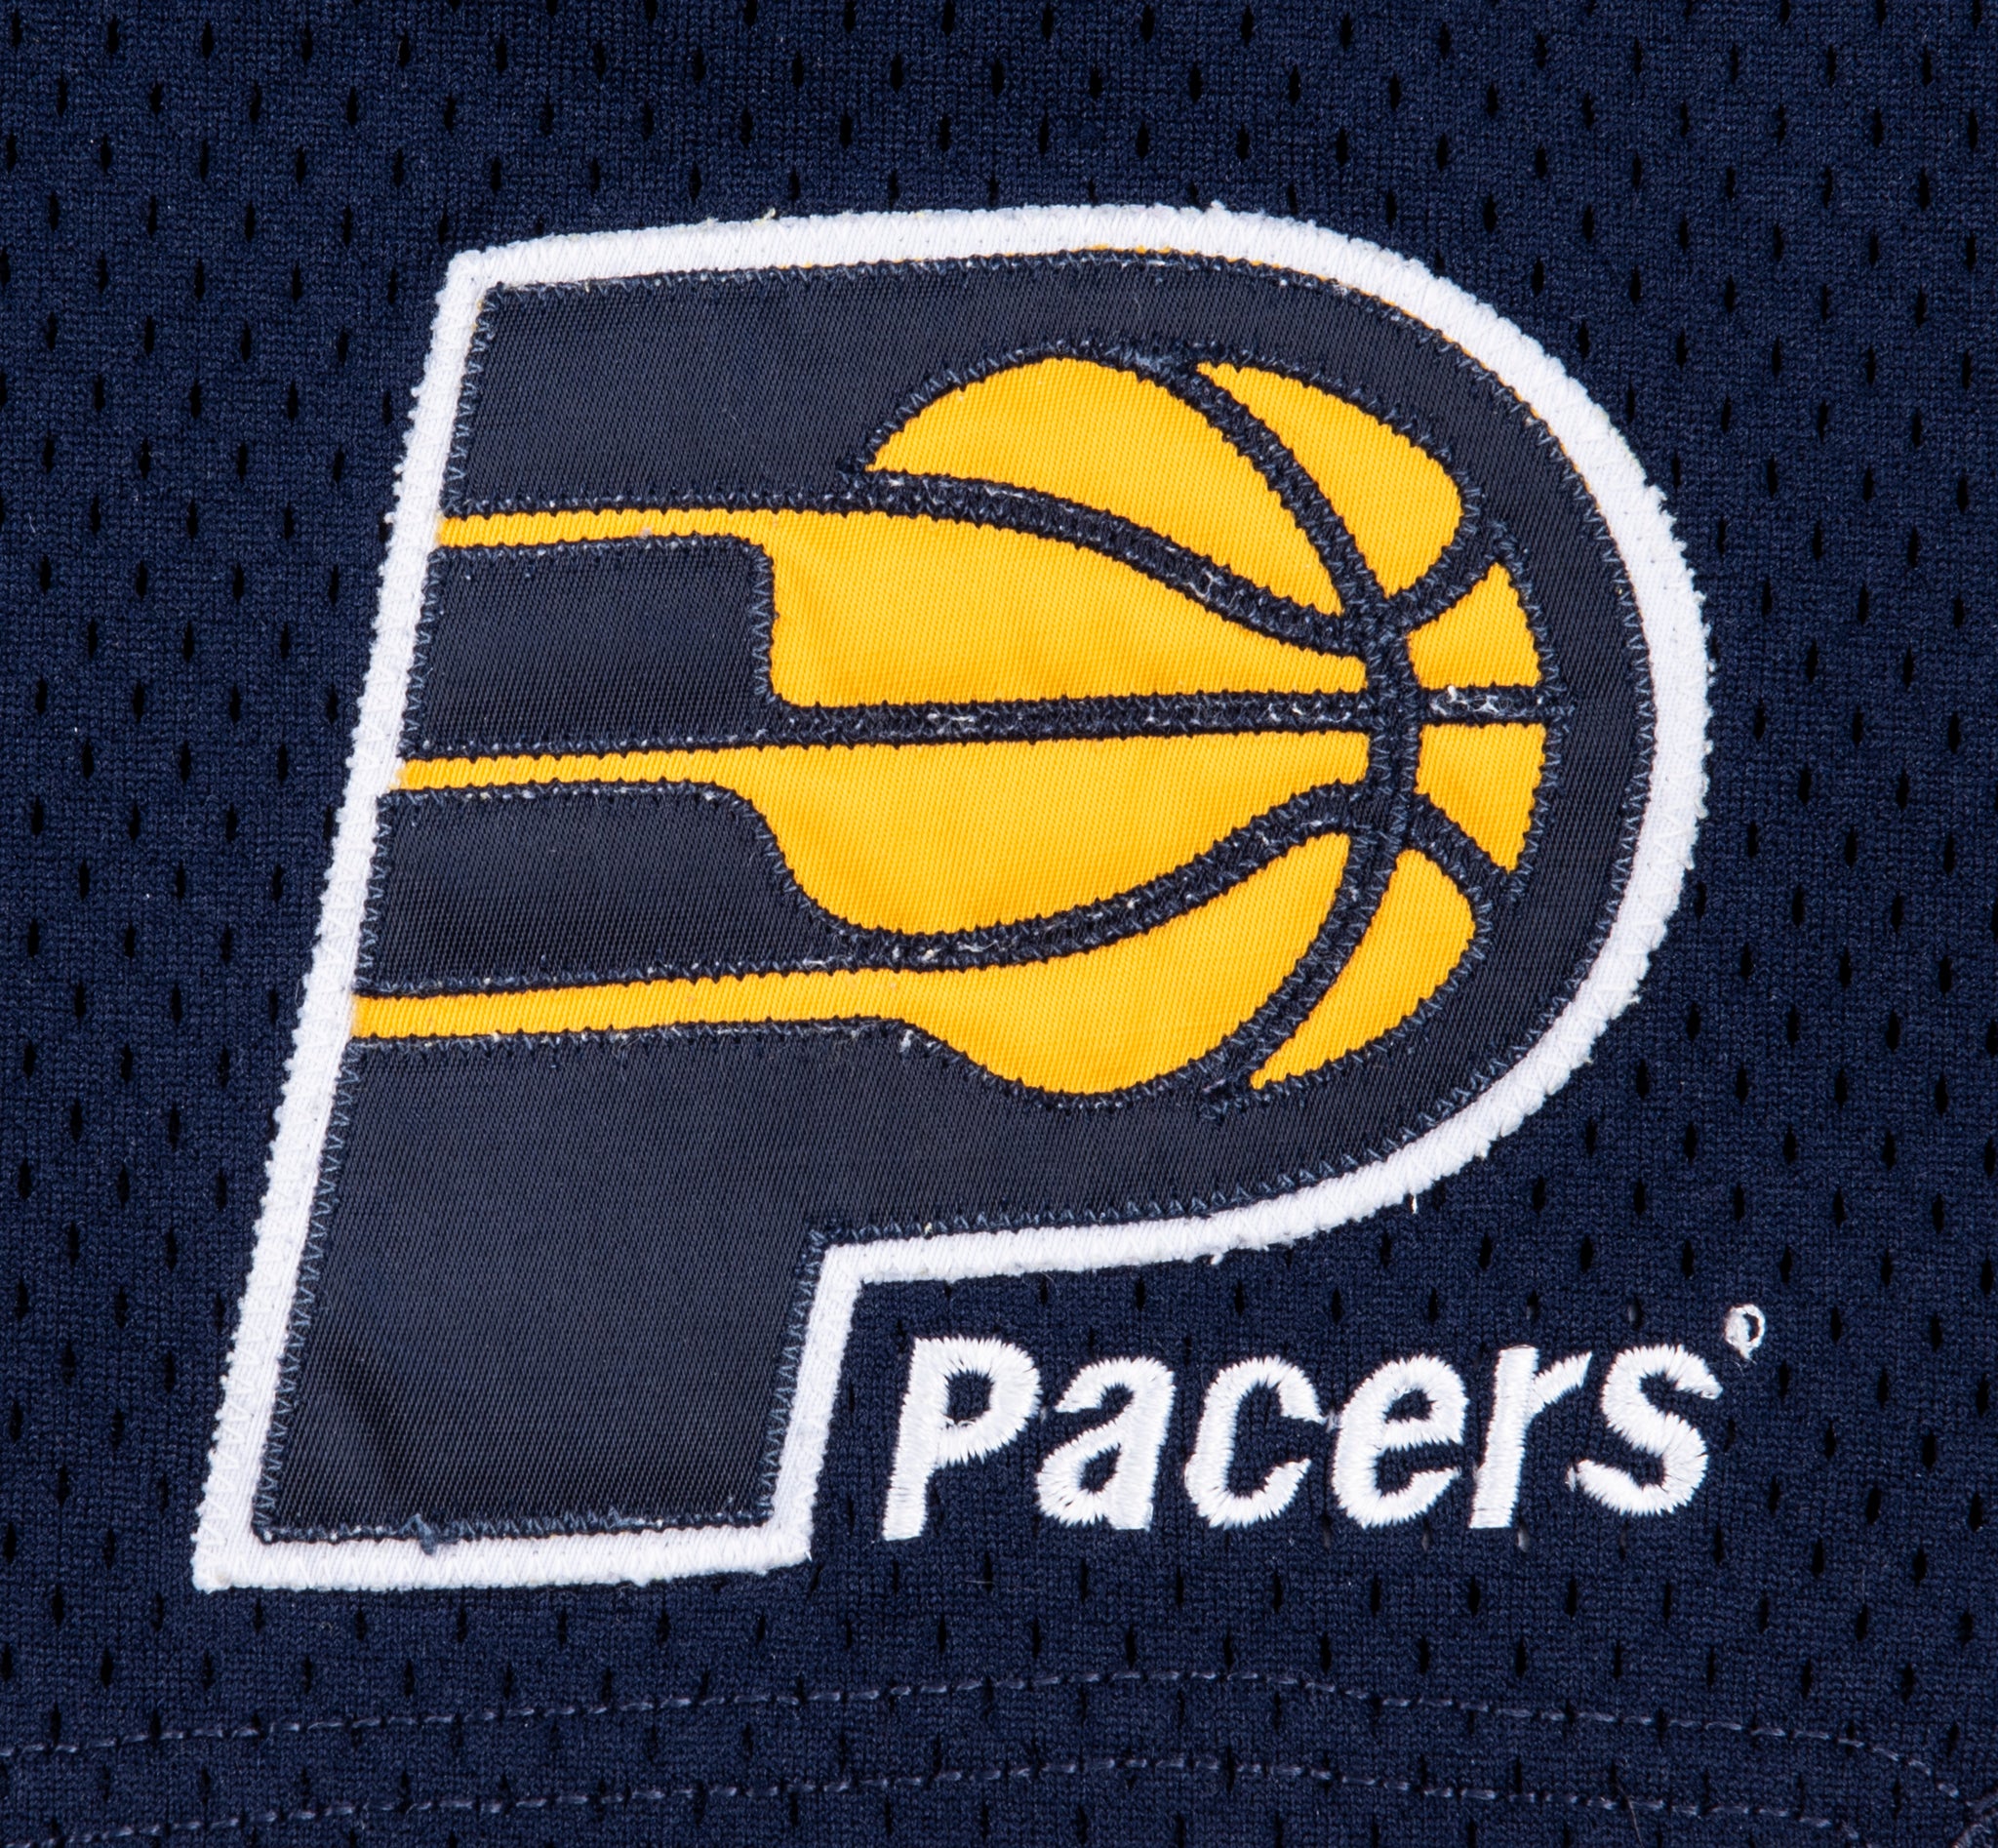 2001-02 Indiana Pacers Blank Game Issued White Jersey 42 DP31864